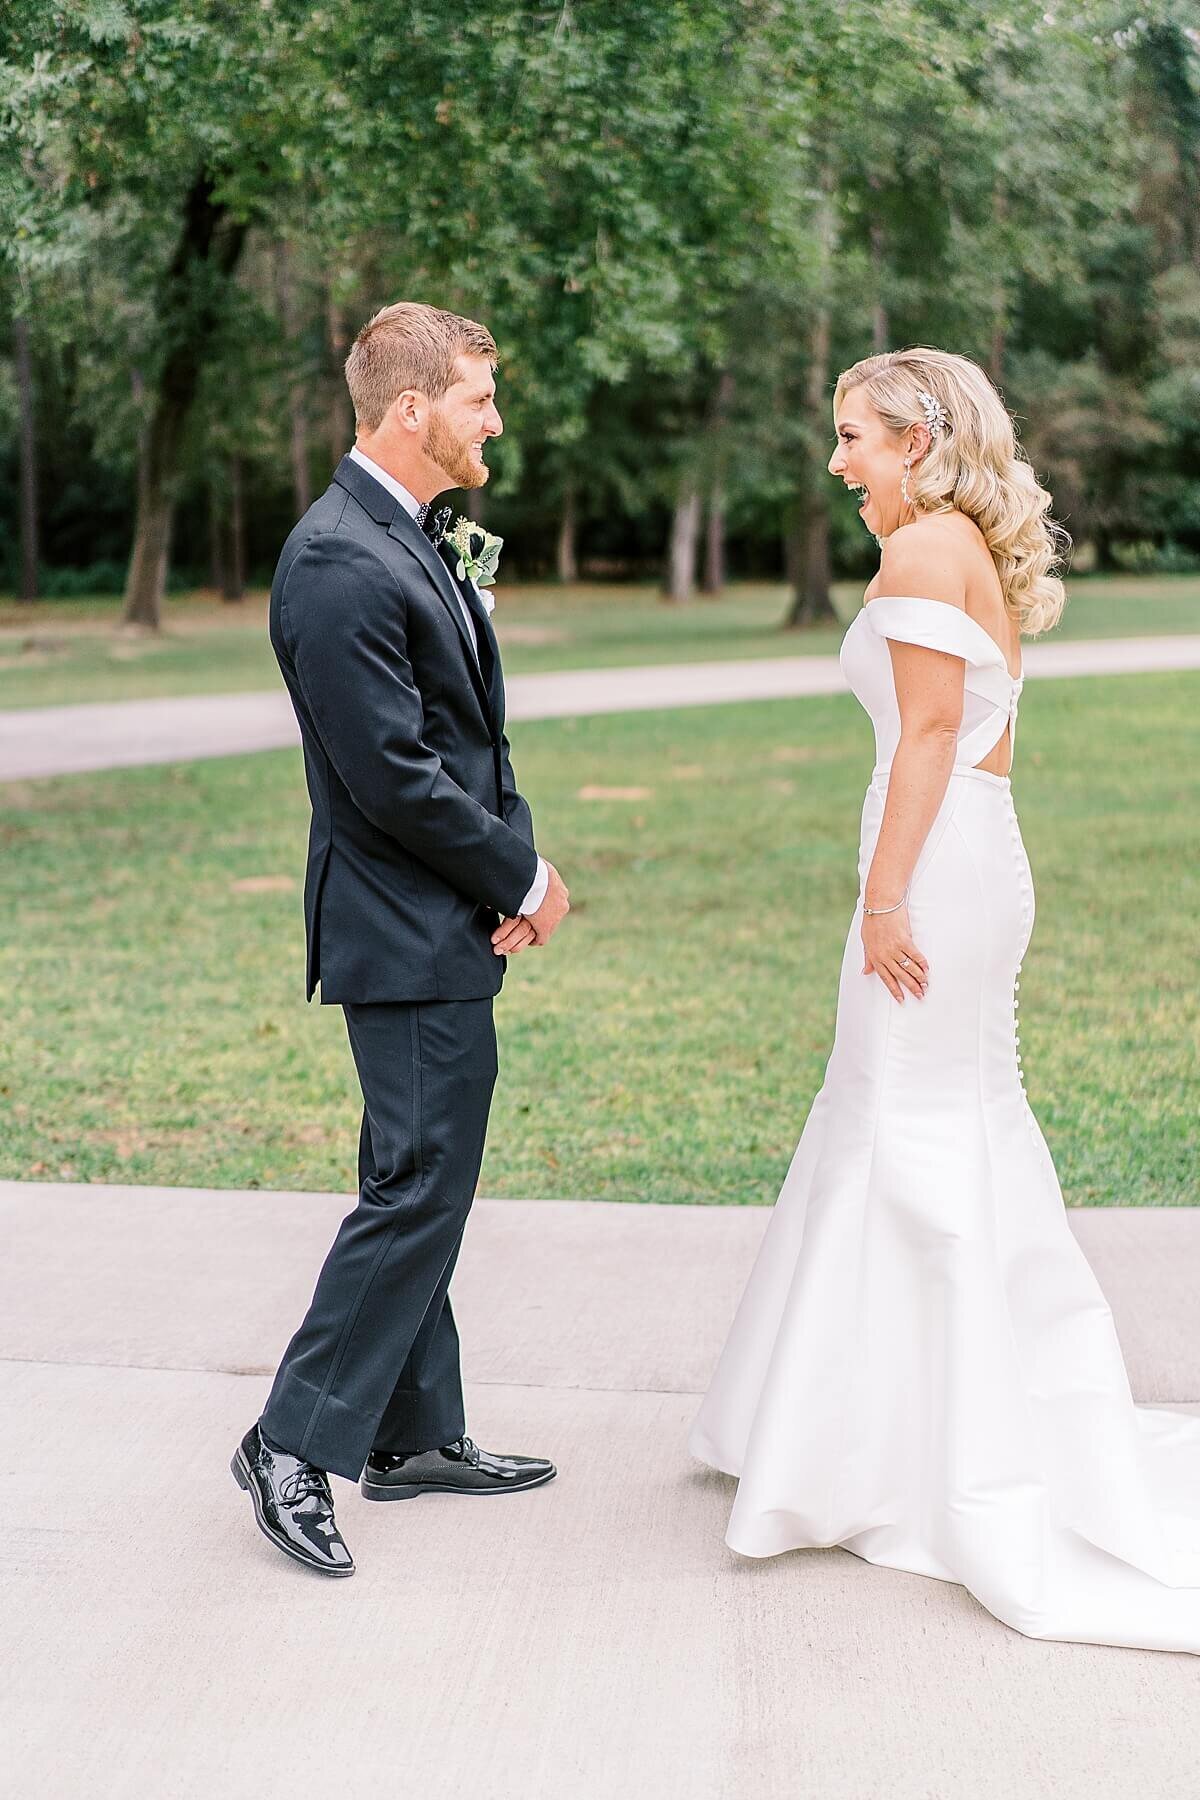 First Look at Black Tie Wedding at the Annex photographed by Alicia Yarrish Photography